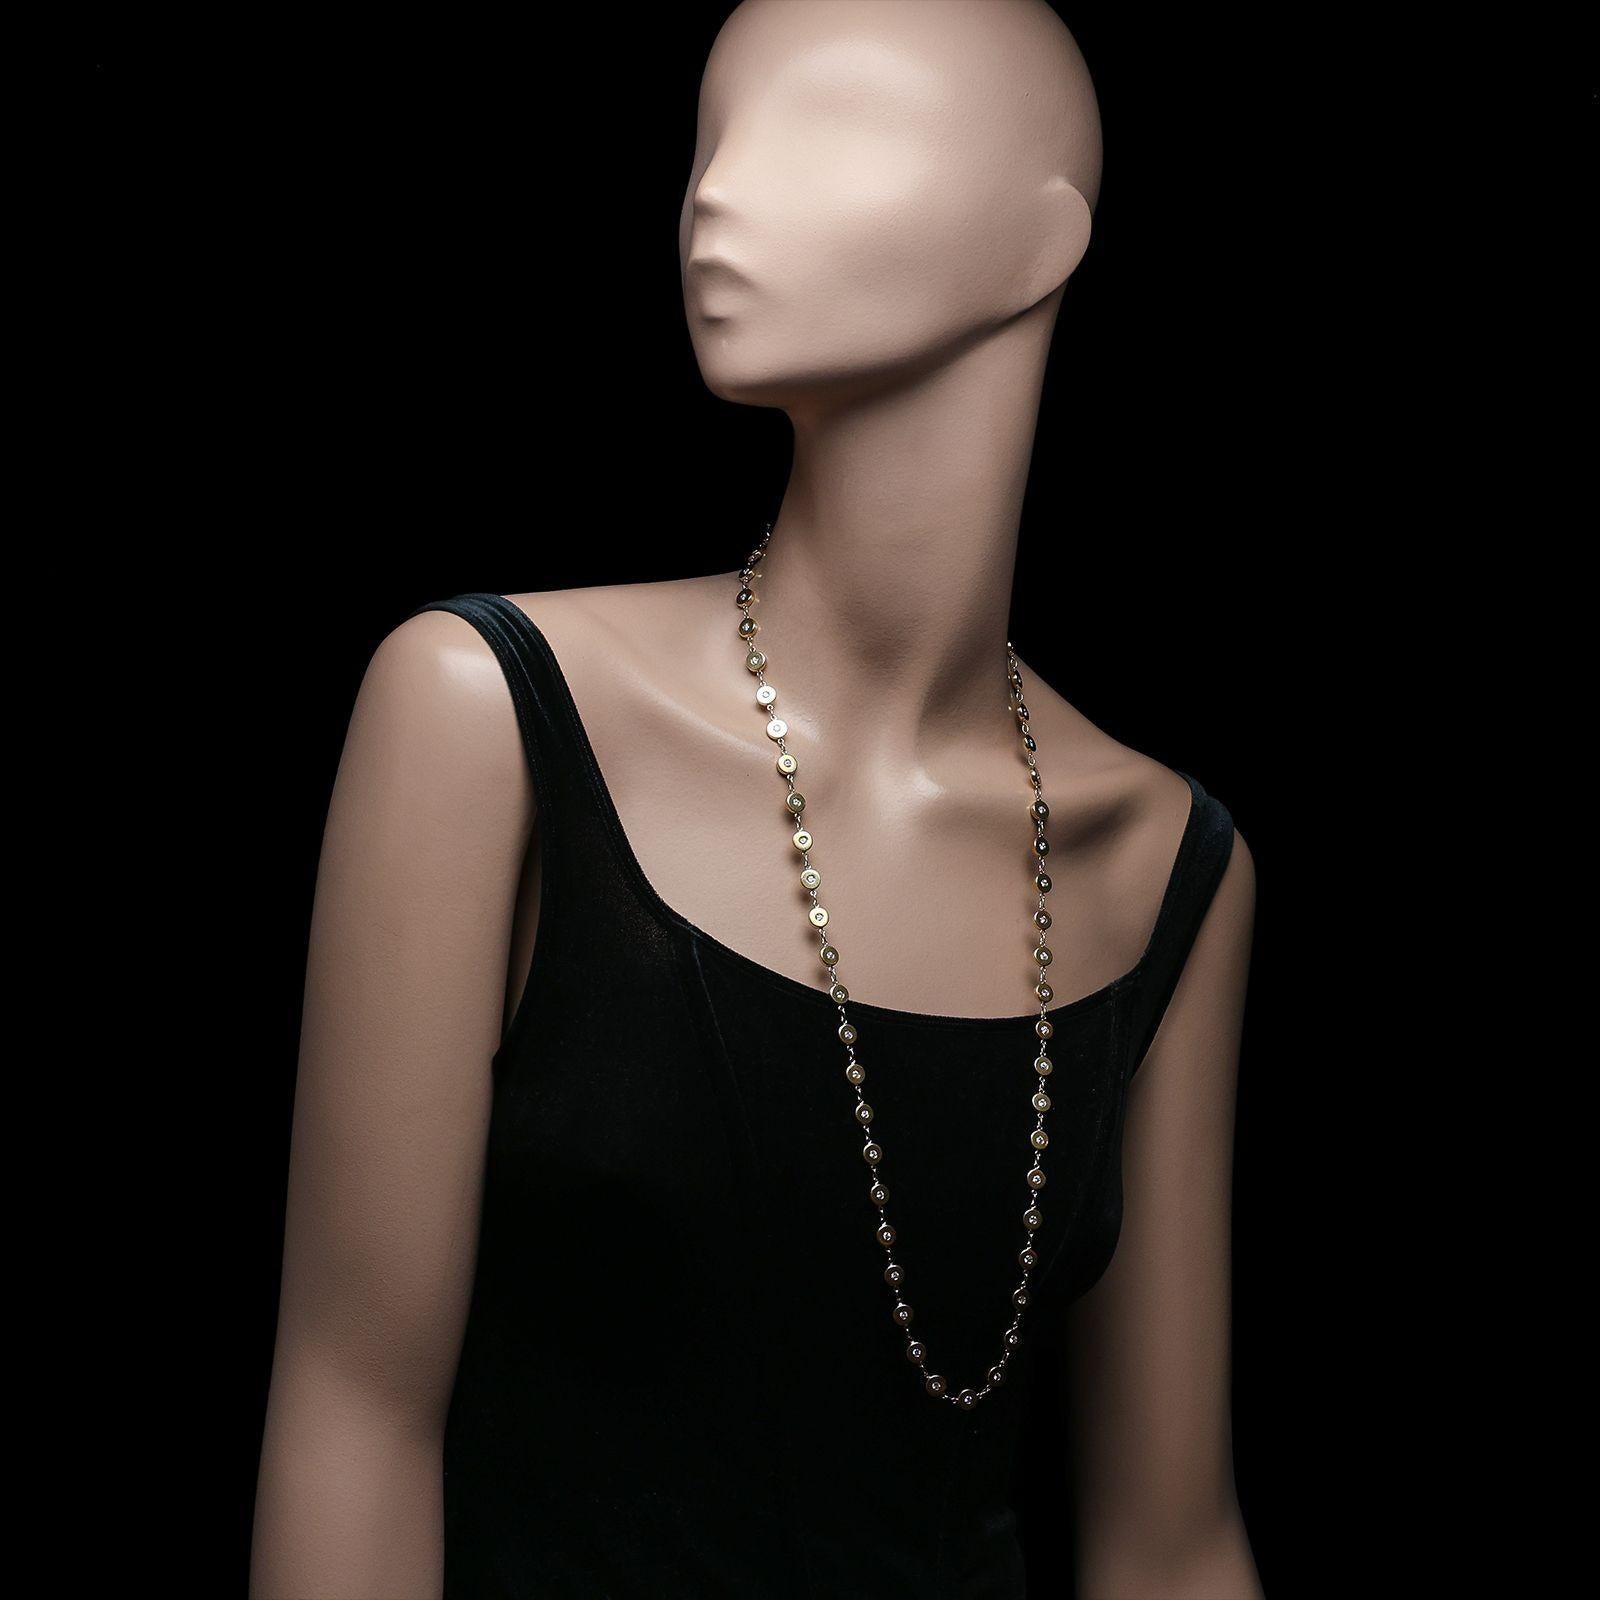 A beautiful gold and diamond long sautoir necklace by Bulgari c.1990s, the 32” necklace formed of fifty three uniform chunky round discs in 18ct yellow gold, joined by short chain link sections, each disc set to the centre with a single round